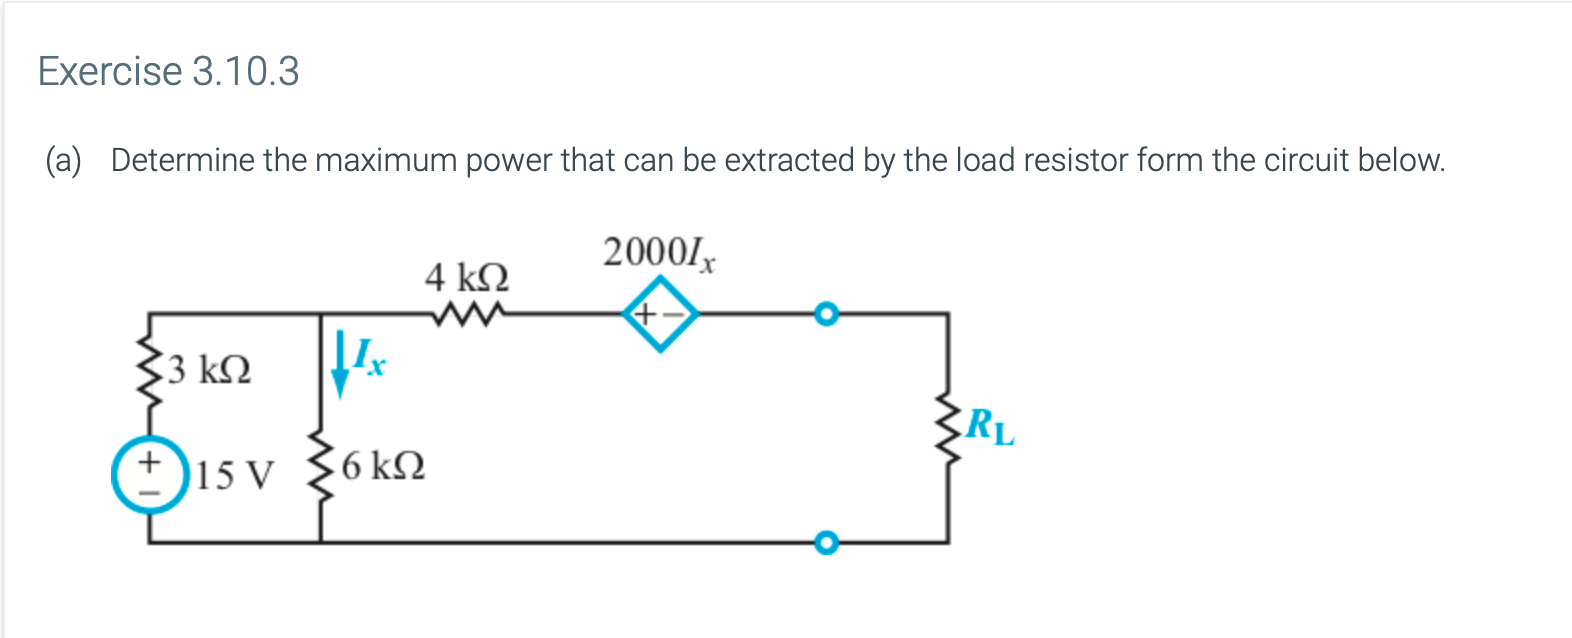 Exercise 3.10.3
(a)
Determine the maximum power that can be extracted by the load resistor form the circuit below.
2000/x
4 kQ
3 kQ
RL
Isv 36kn
+)15 V
